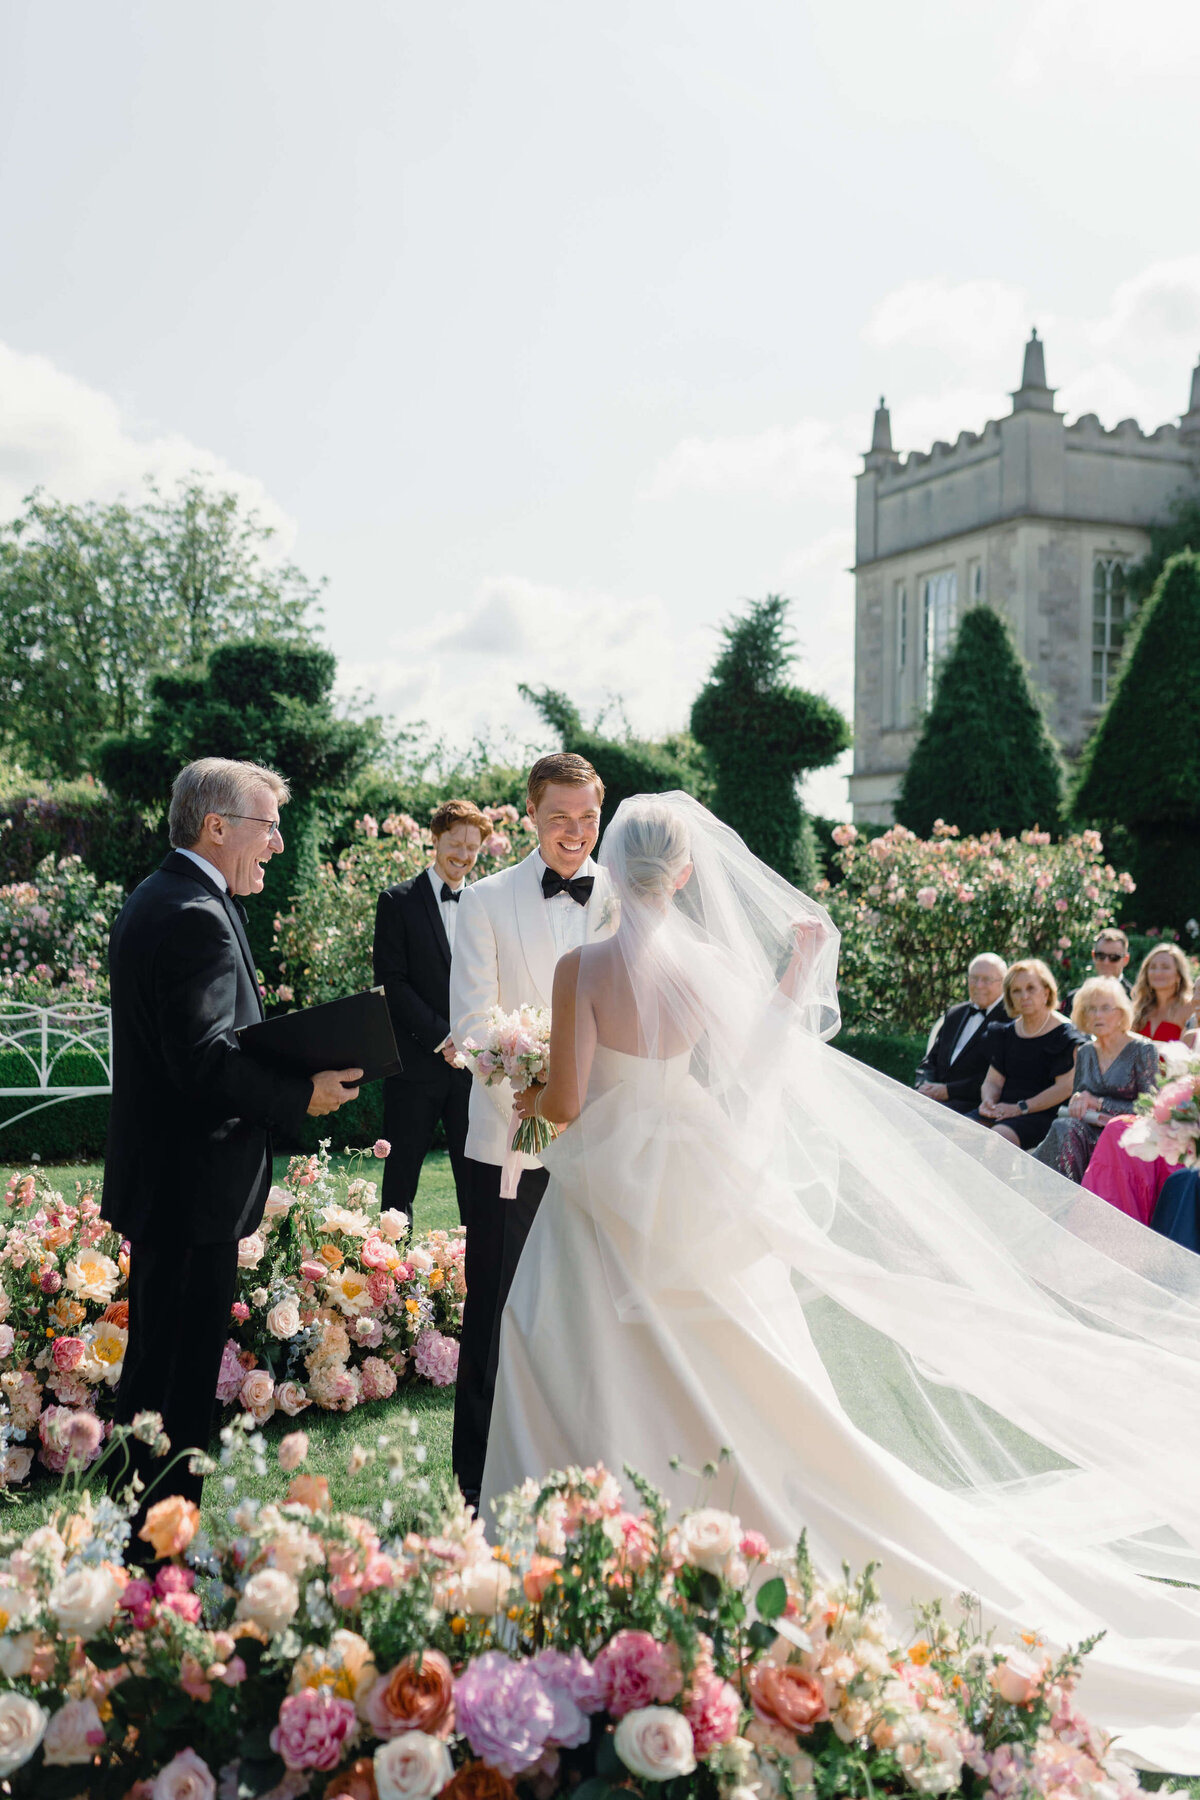 bride and groom take their vows in a garden ceremony amongst a curved wall of pink flowers in the garden of romantic cotswold venue euridge manor